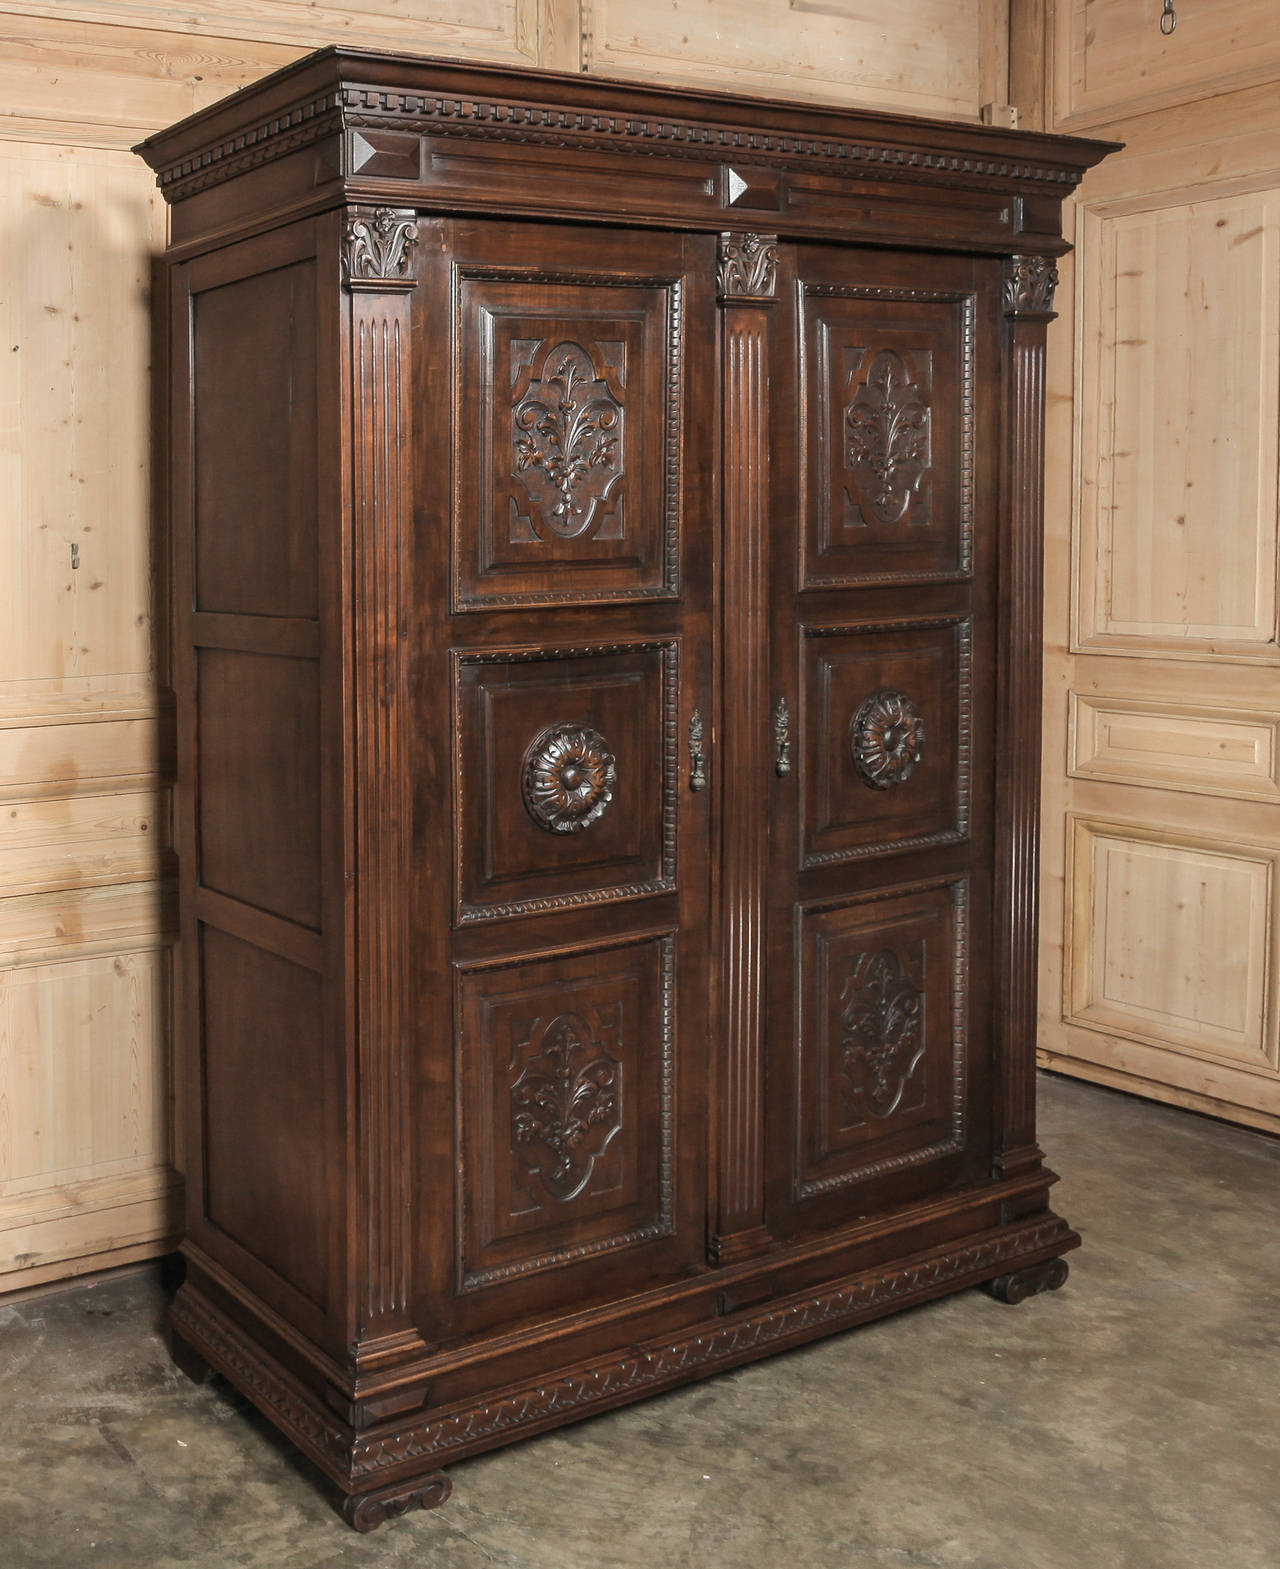 Rendered in Renaissance magnificence from fine Italian walnut, this handsome armoire boasts fluted corner-posts topped with Corinthian corbels acting as framework for finely carved door panels arranged in threes. Bold rosettes at the center and